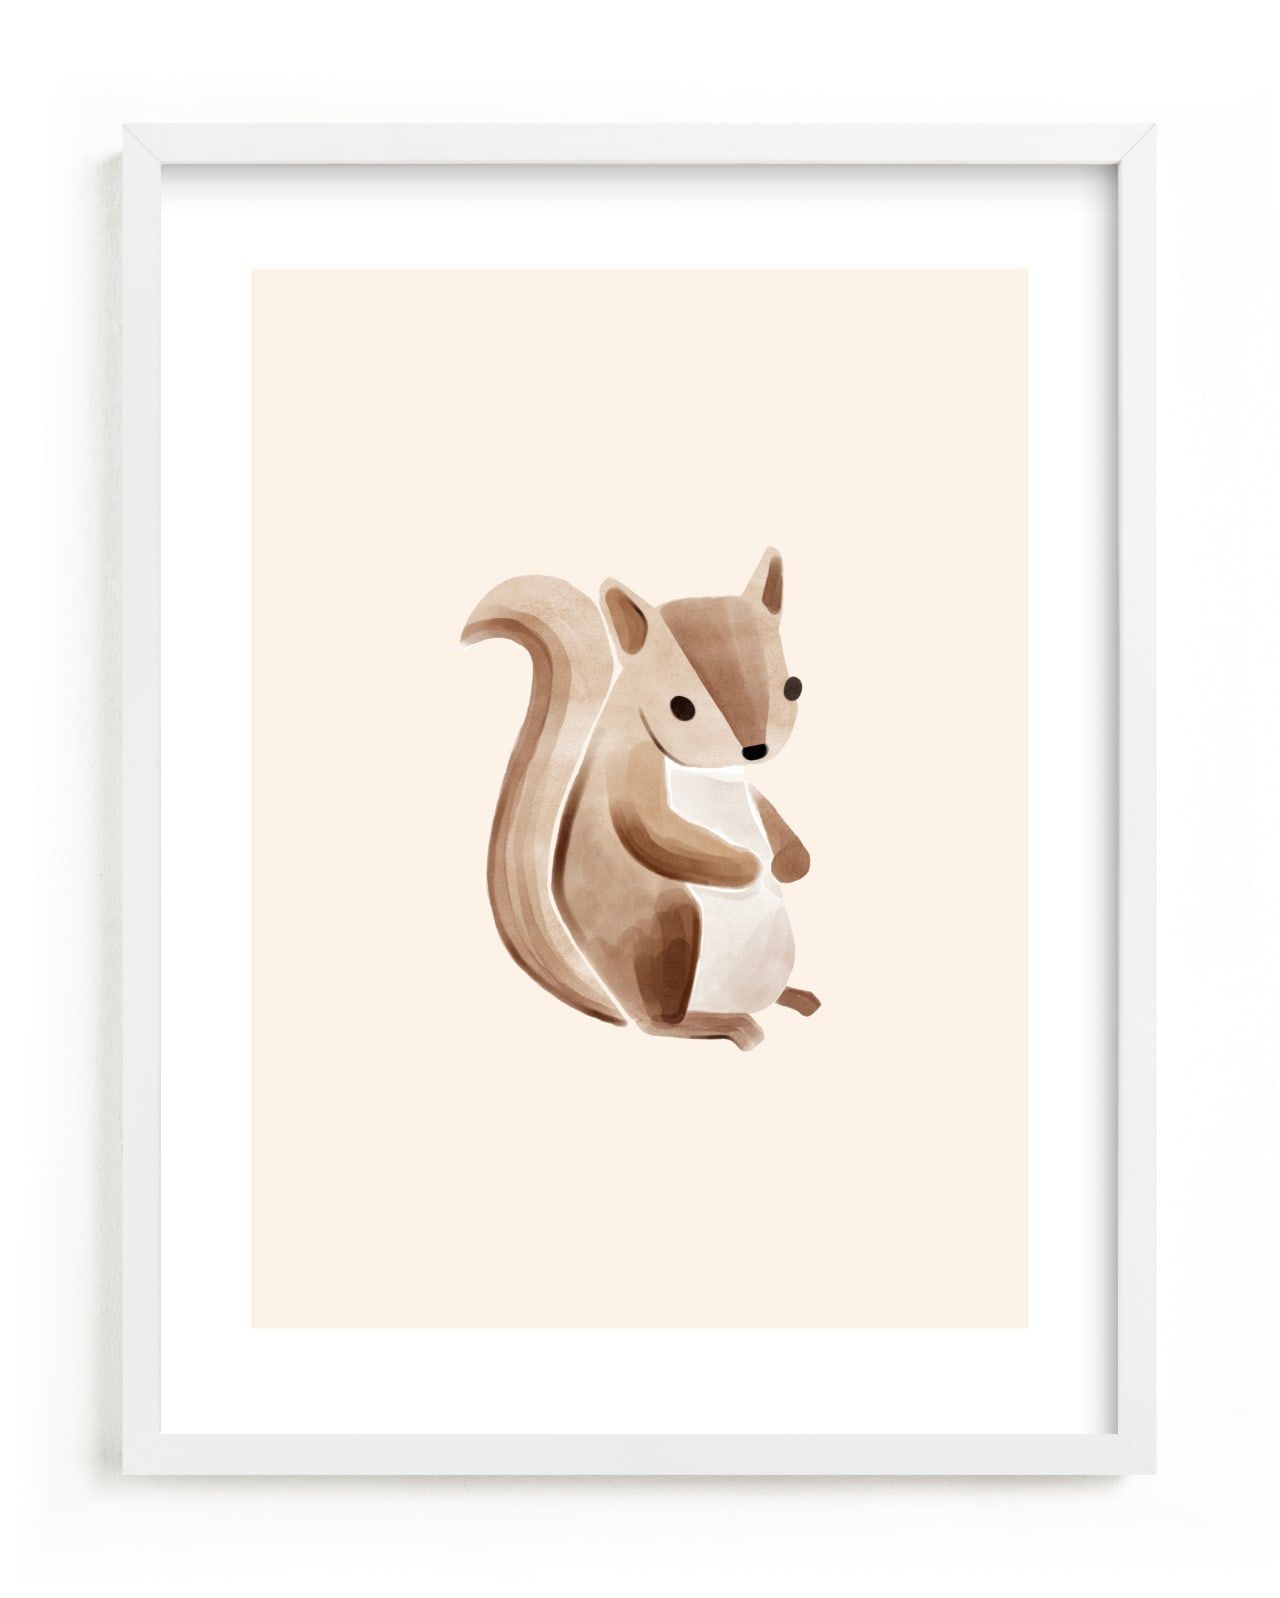 "Baby Squirrel" - Painting Limited Edition Art Print by Vivian Yiwing. | Minted